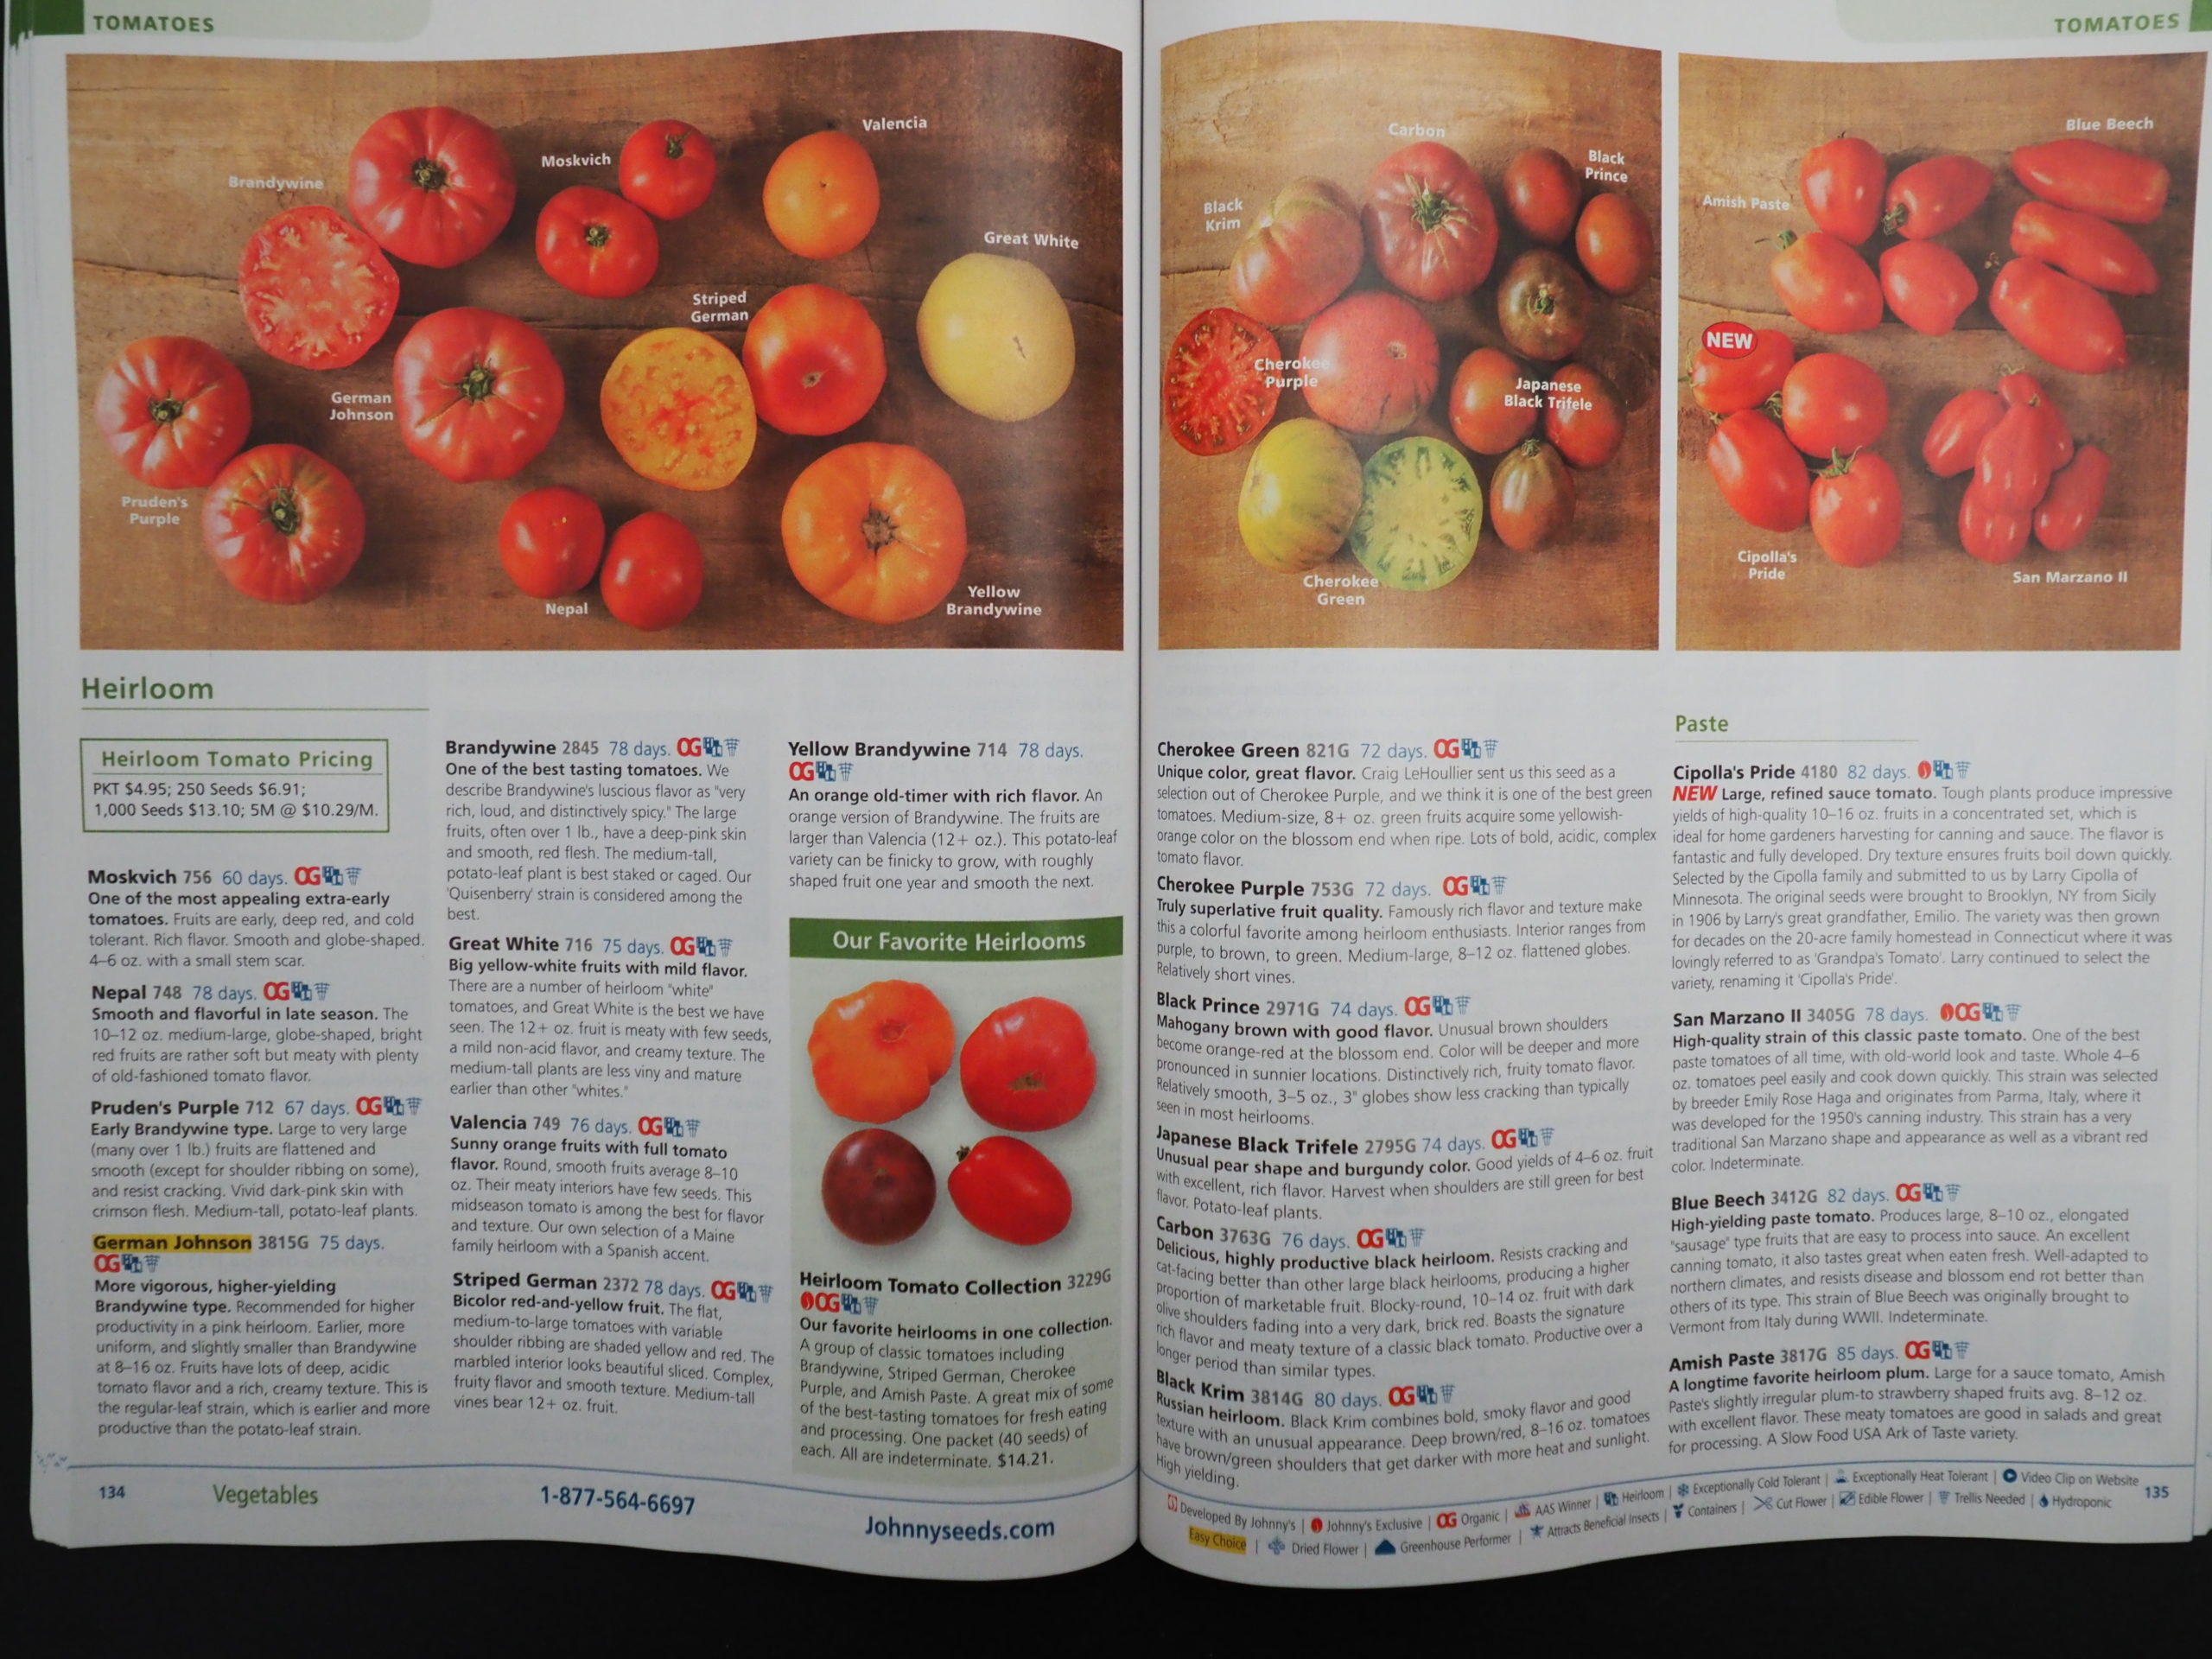 Having trouble deciding which heirloom tomato to grow?  Johnny’s terrific pictures and descriptions can go a long way to help in the decision process.